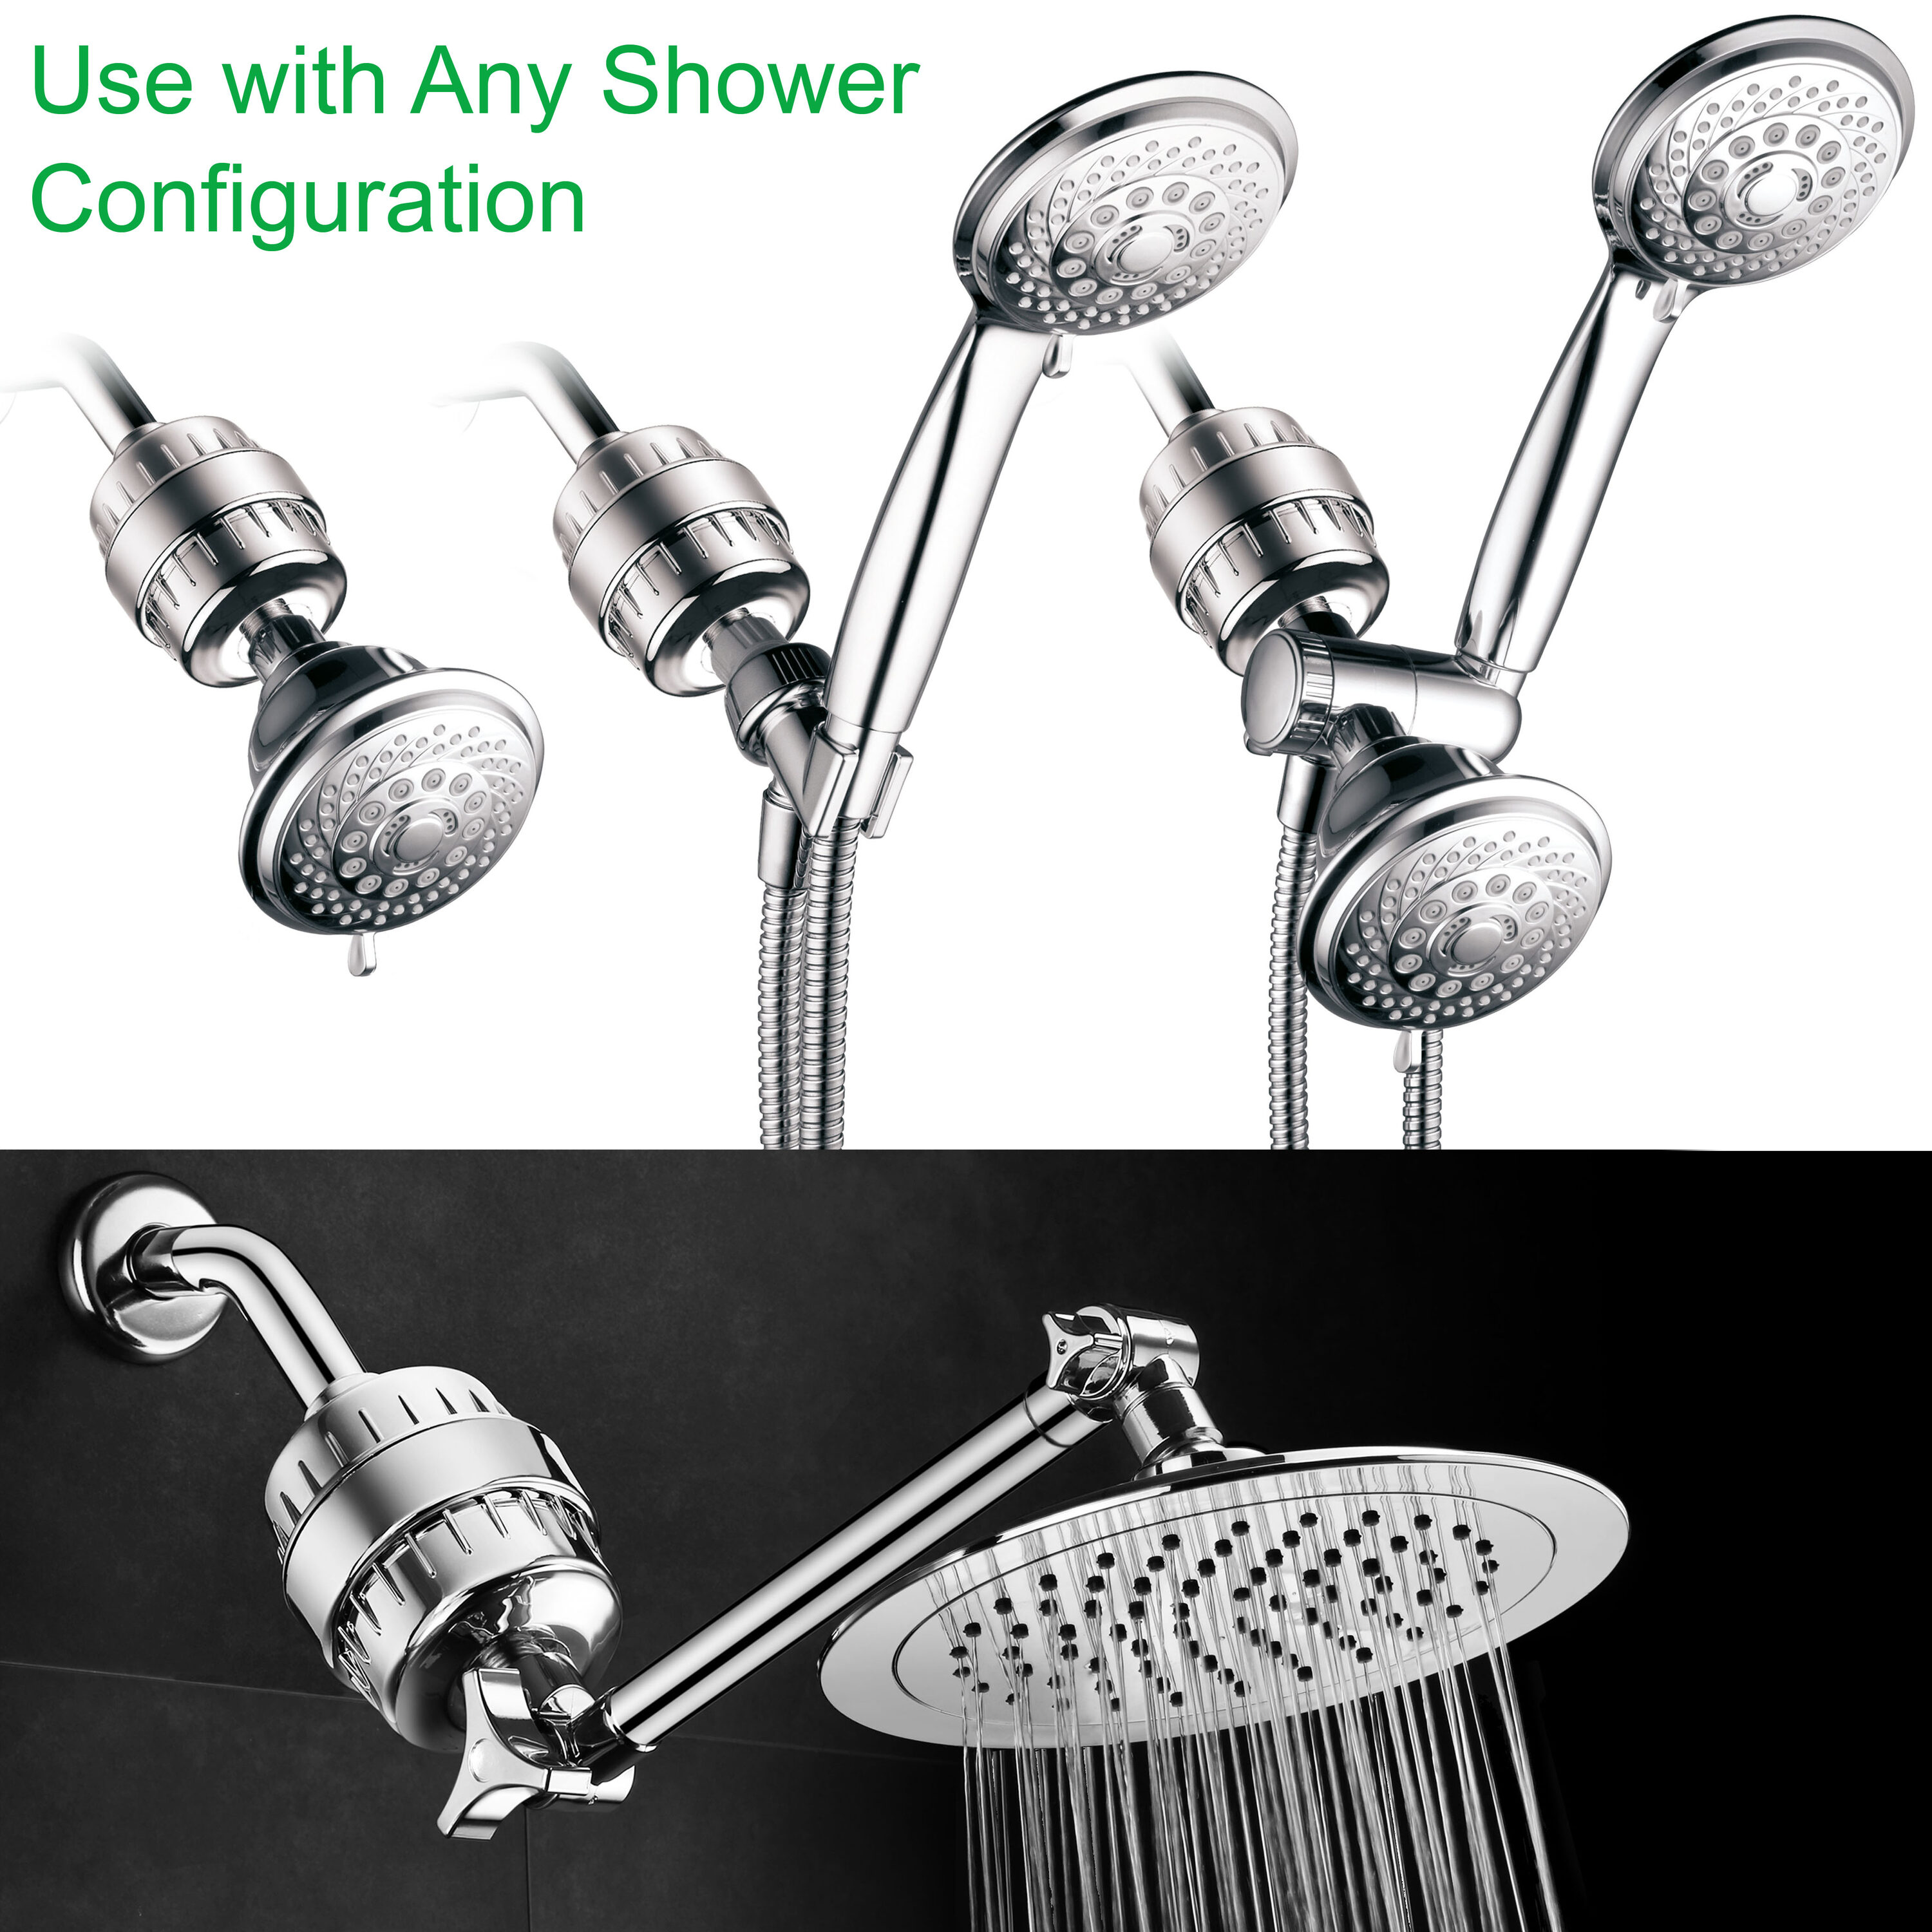 Ultimate Dual KDF Shower Filter without Head (Chloramine Removal